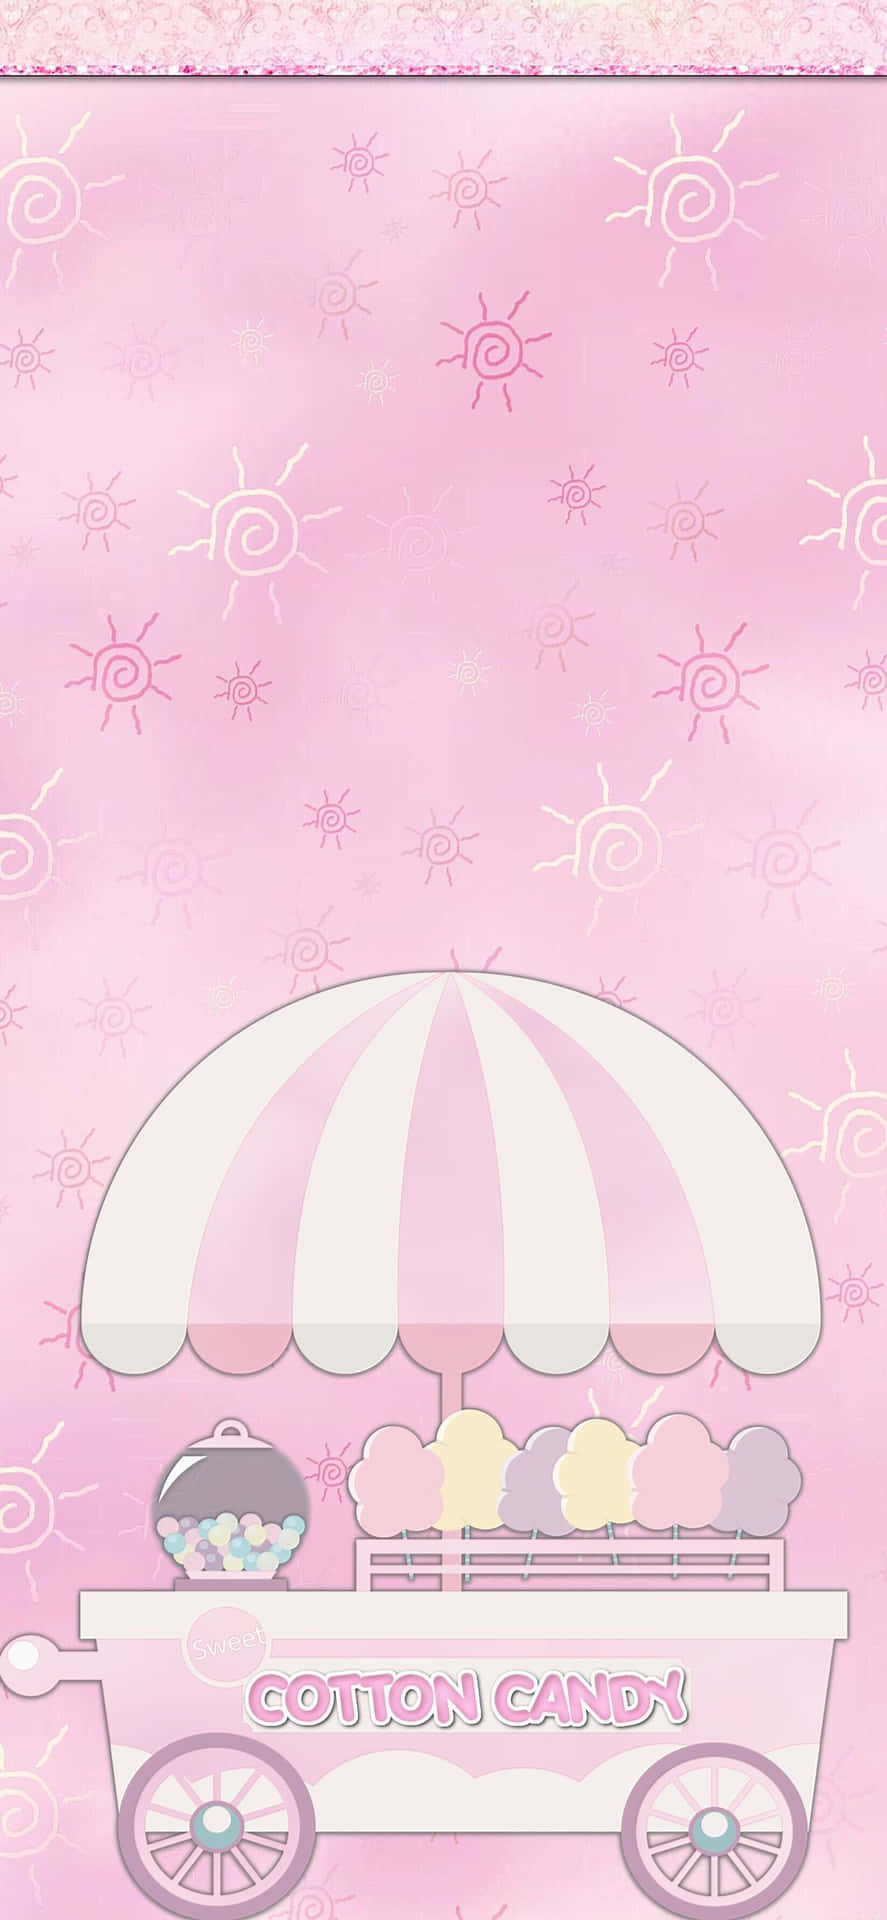 Cute Cotton Candy Cart Background